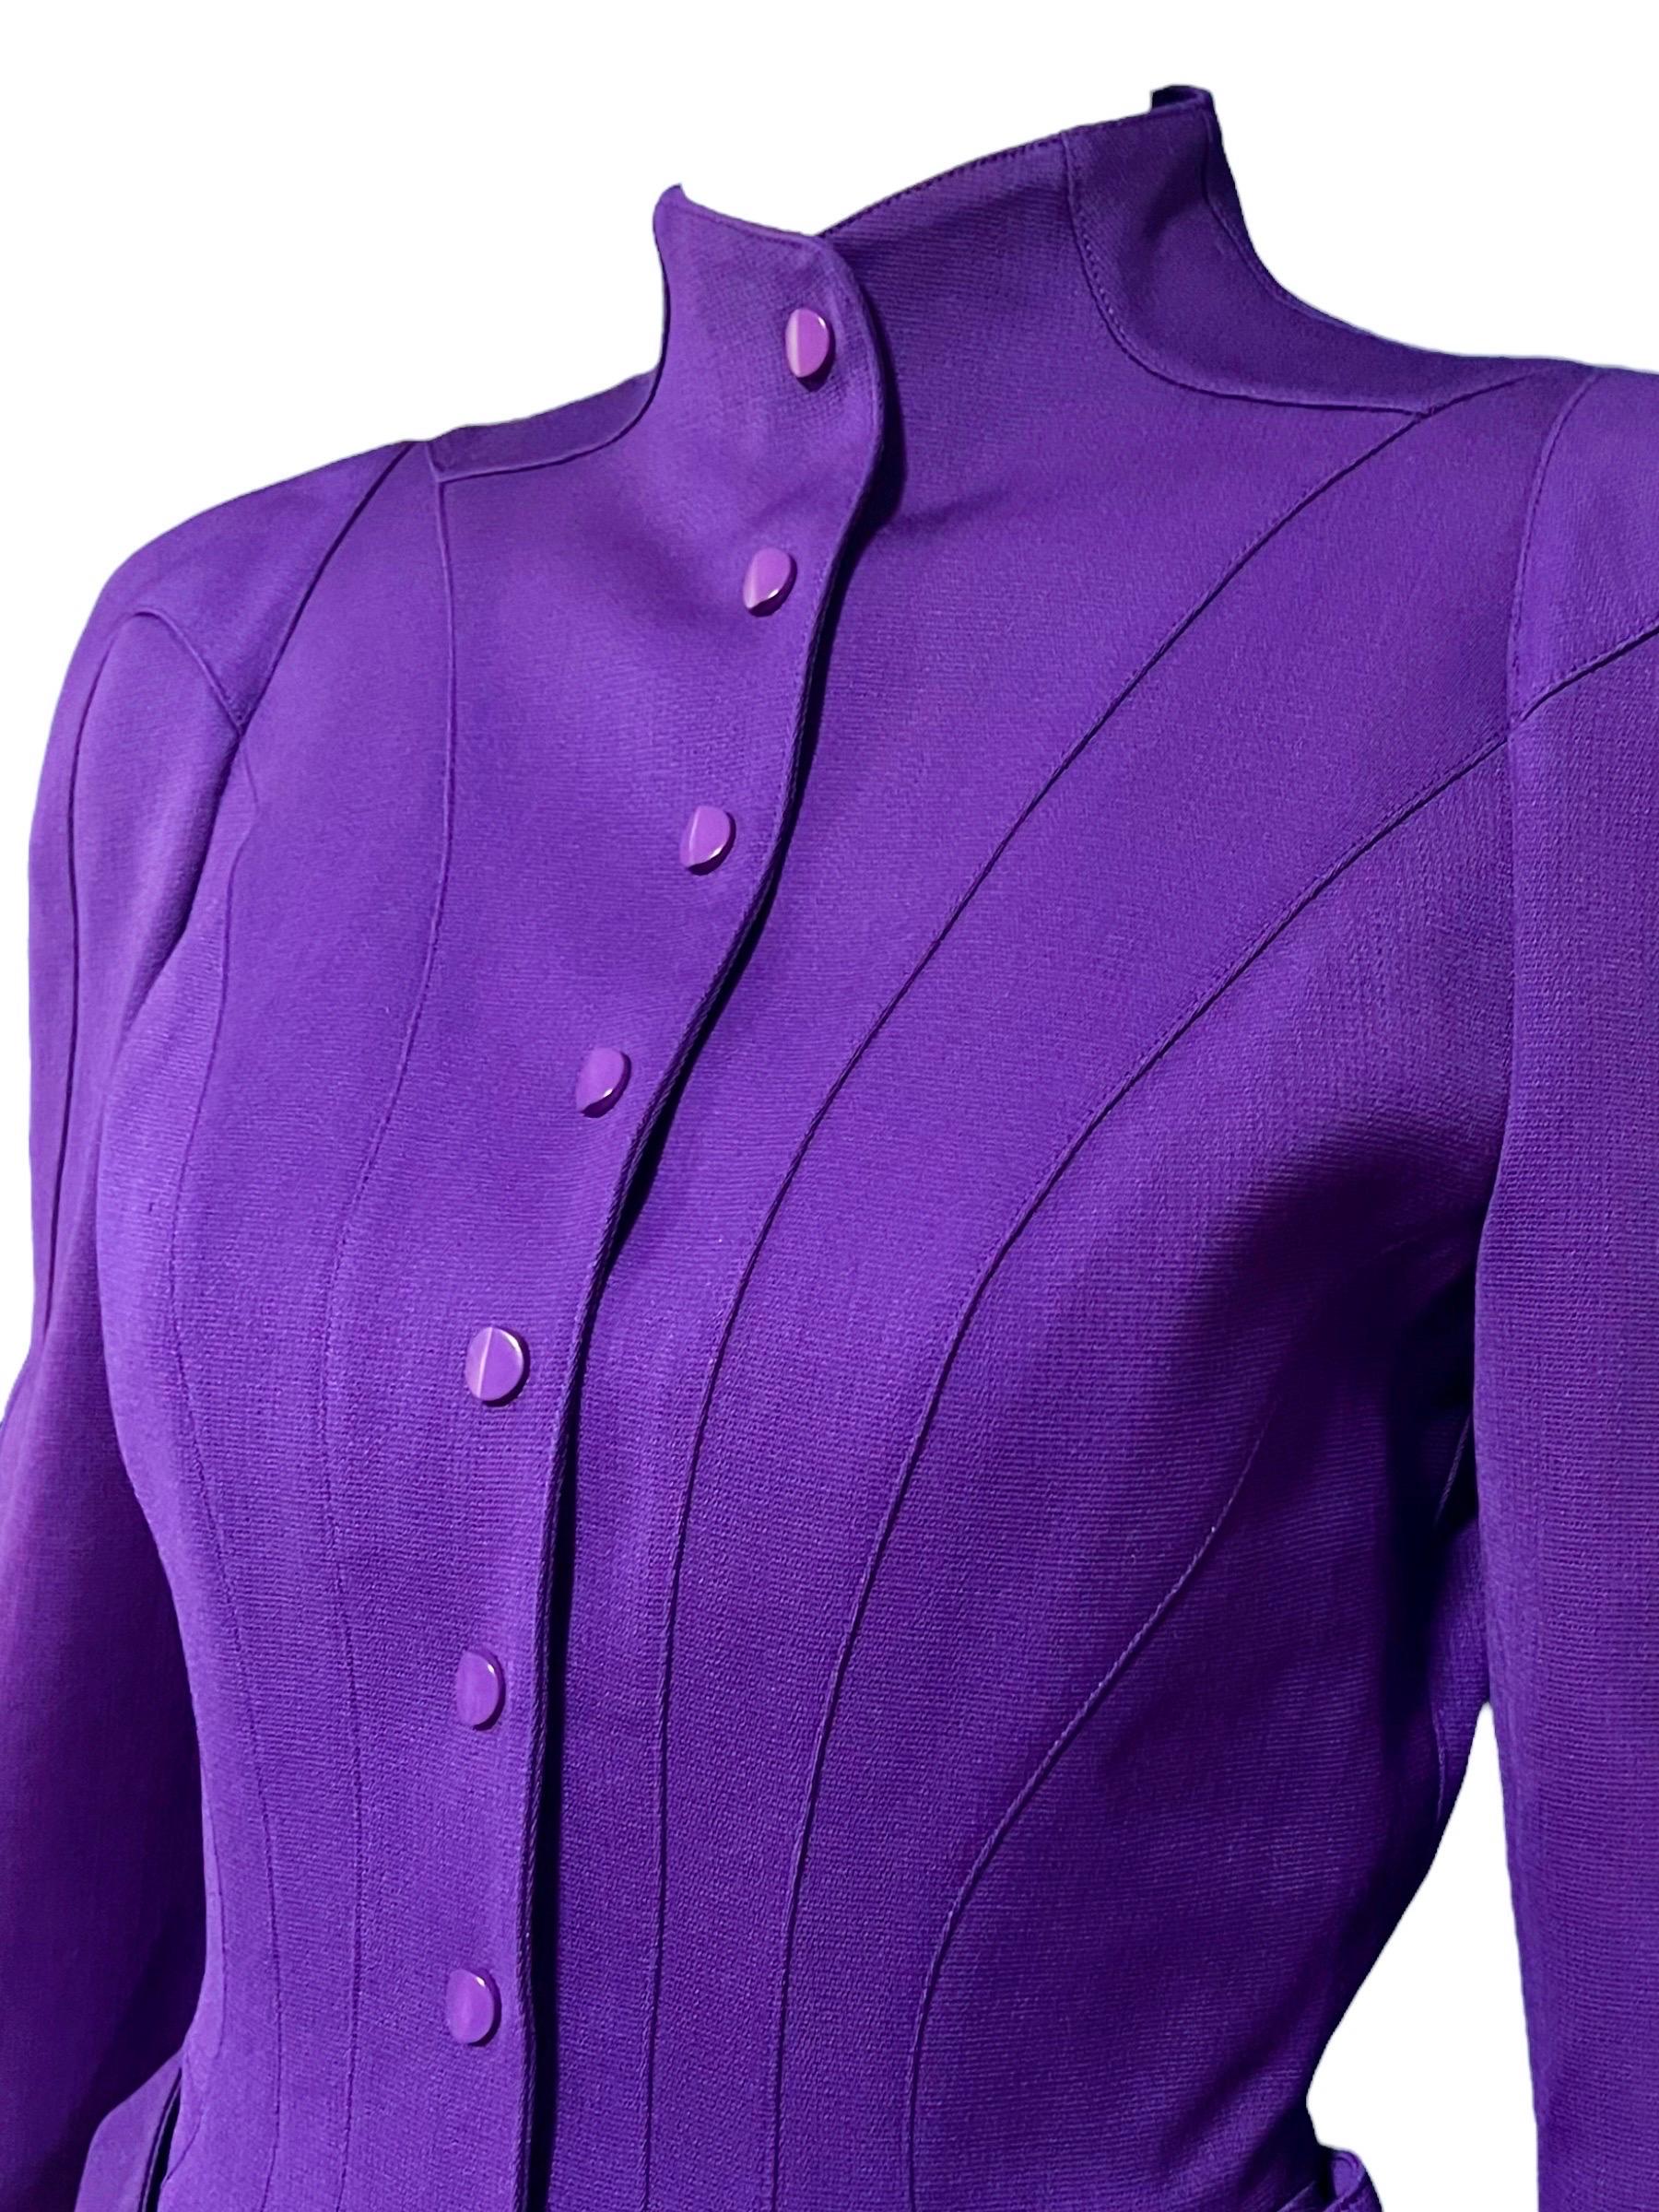 F/W 1988 Thierry Mugler Purple Futuristic Les Infernales Sculptural Jacket For Sale 3